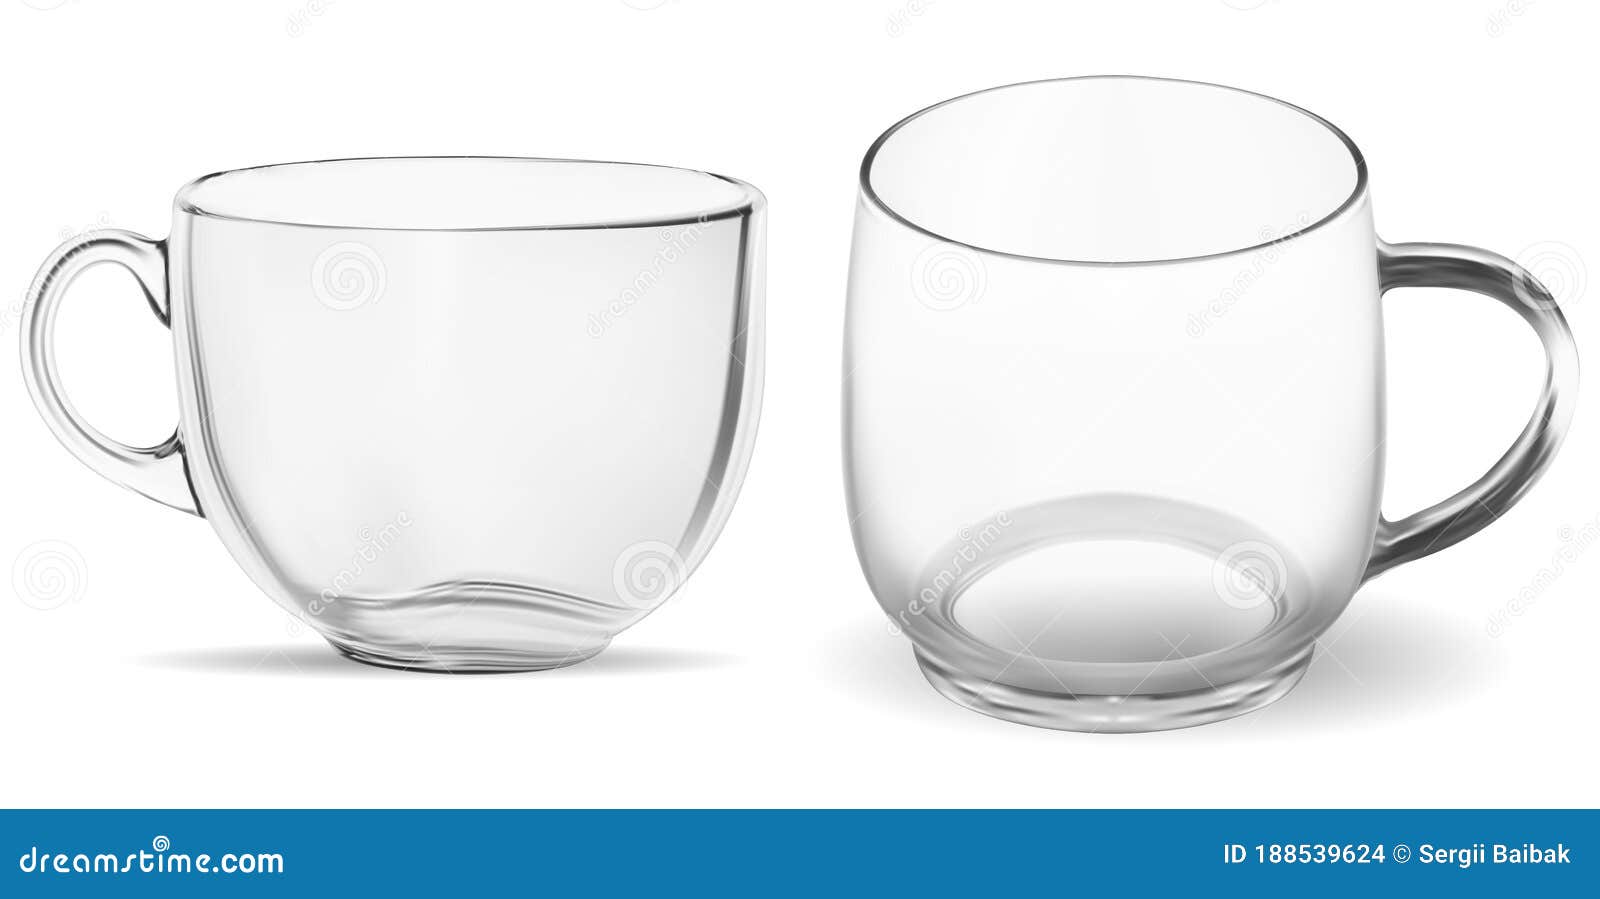 Download Coffee Cup. Clean Transparent Glass Tea Mug Mockup Stock Vector - Illustration of coffeecup ...